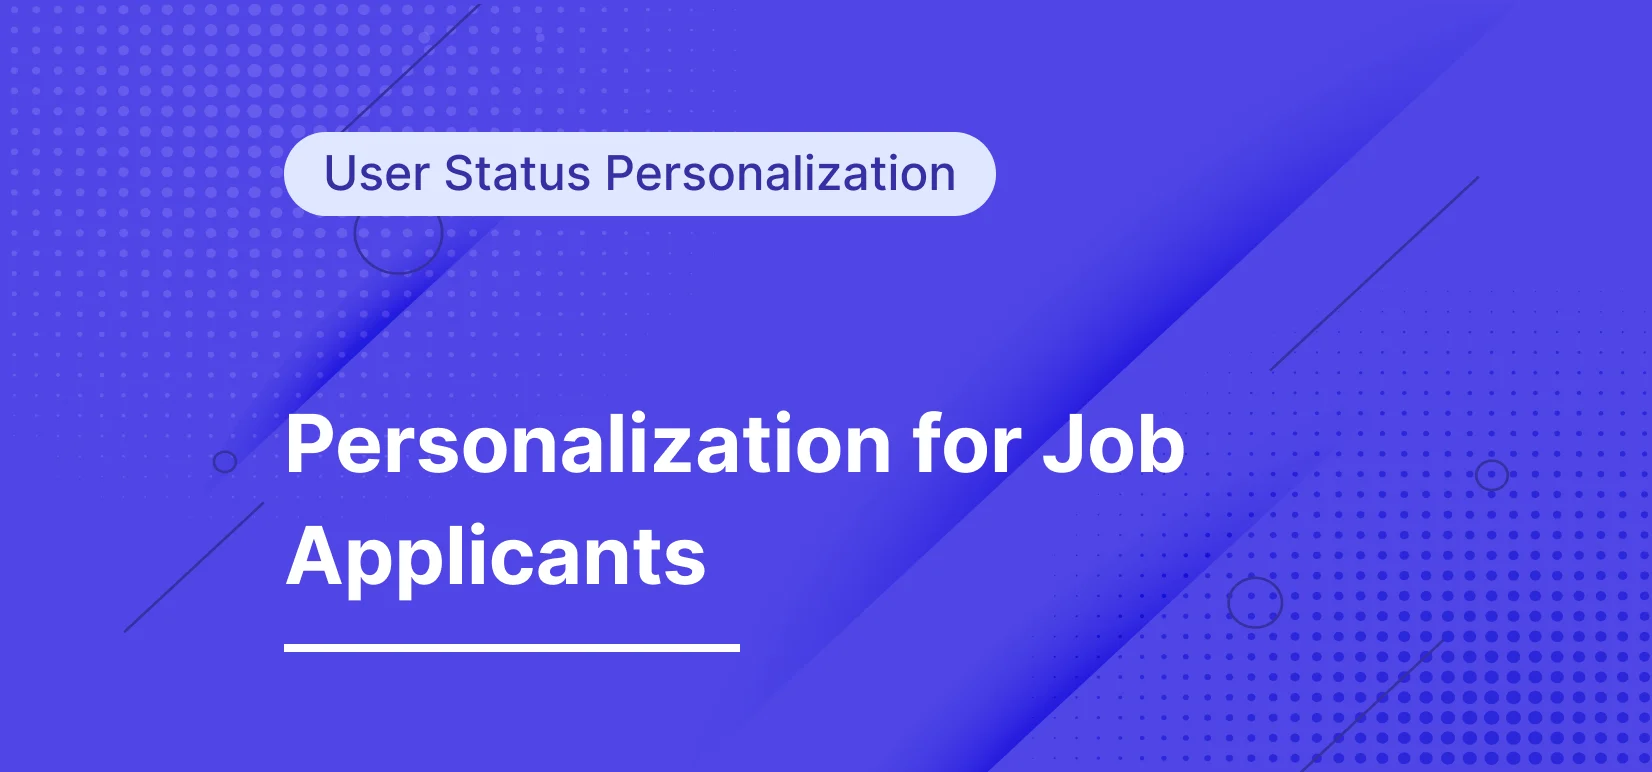 Personalizing the Job Application Experience for Candidates